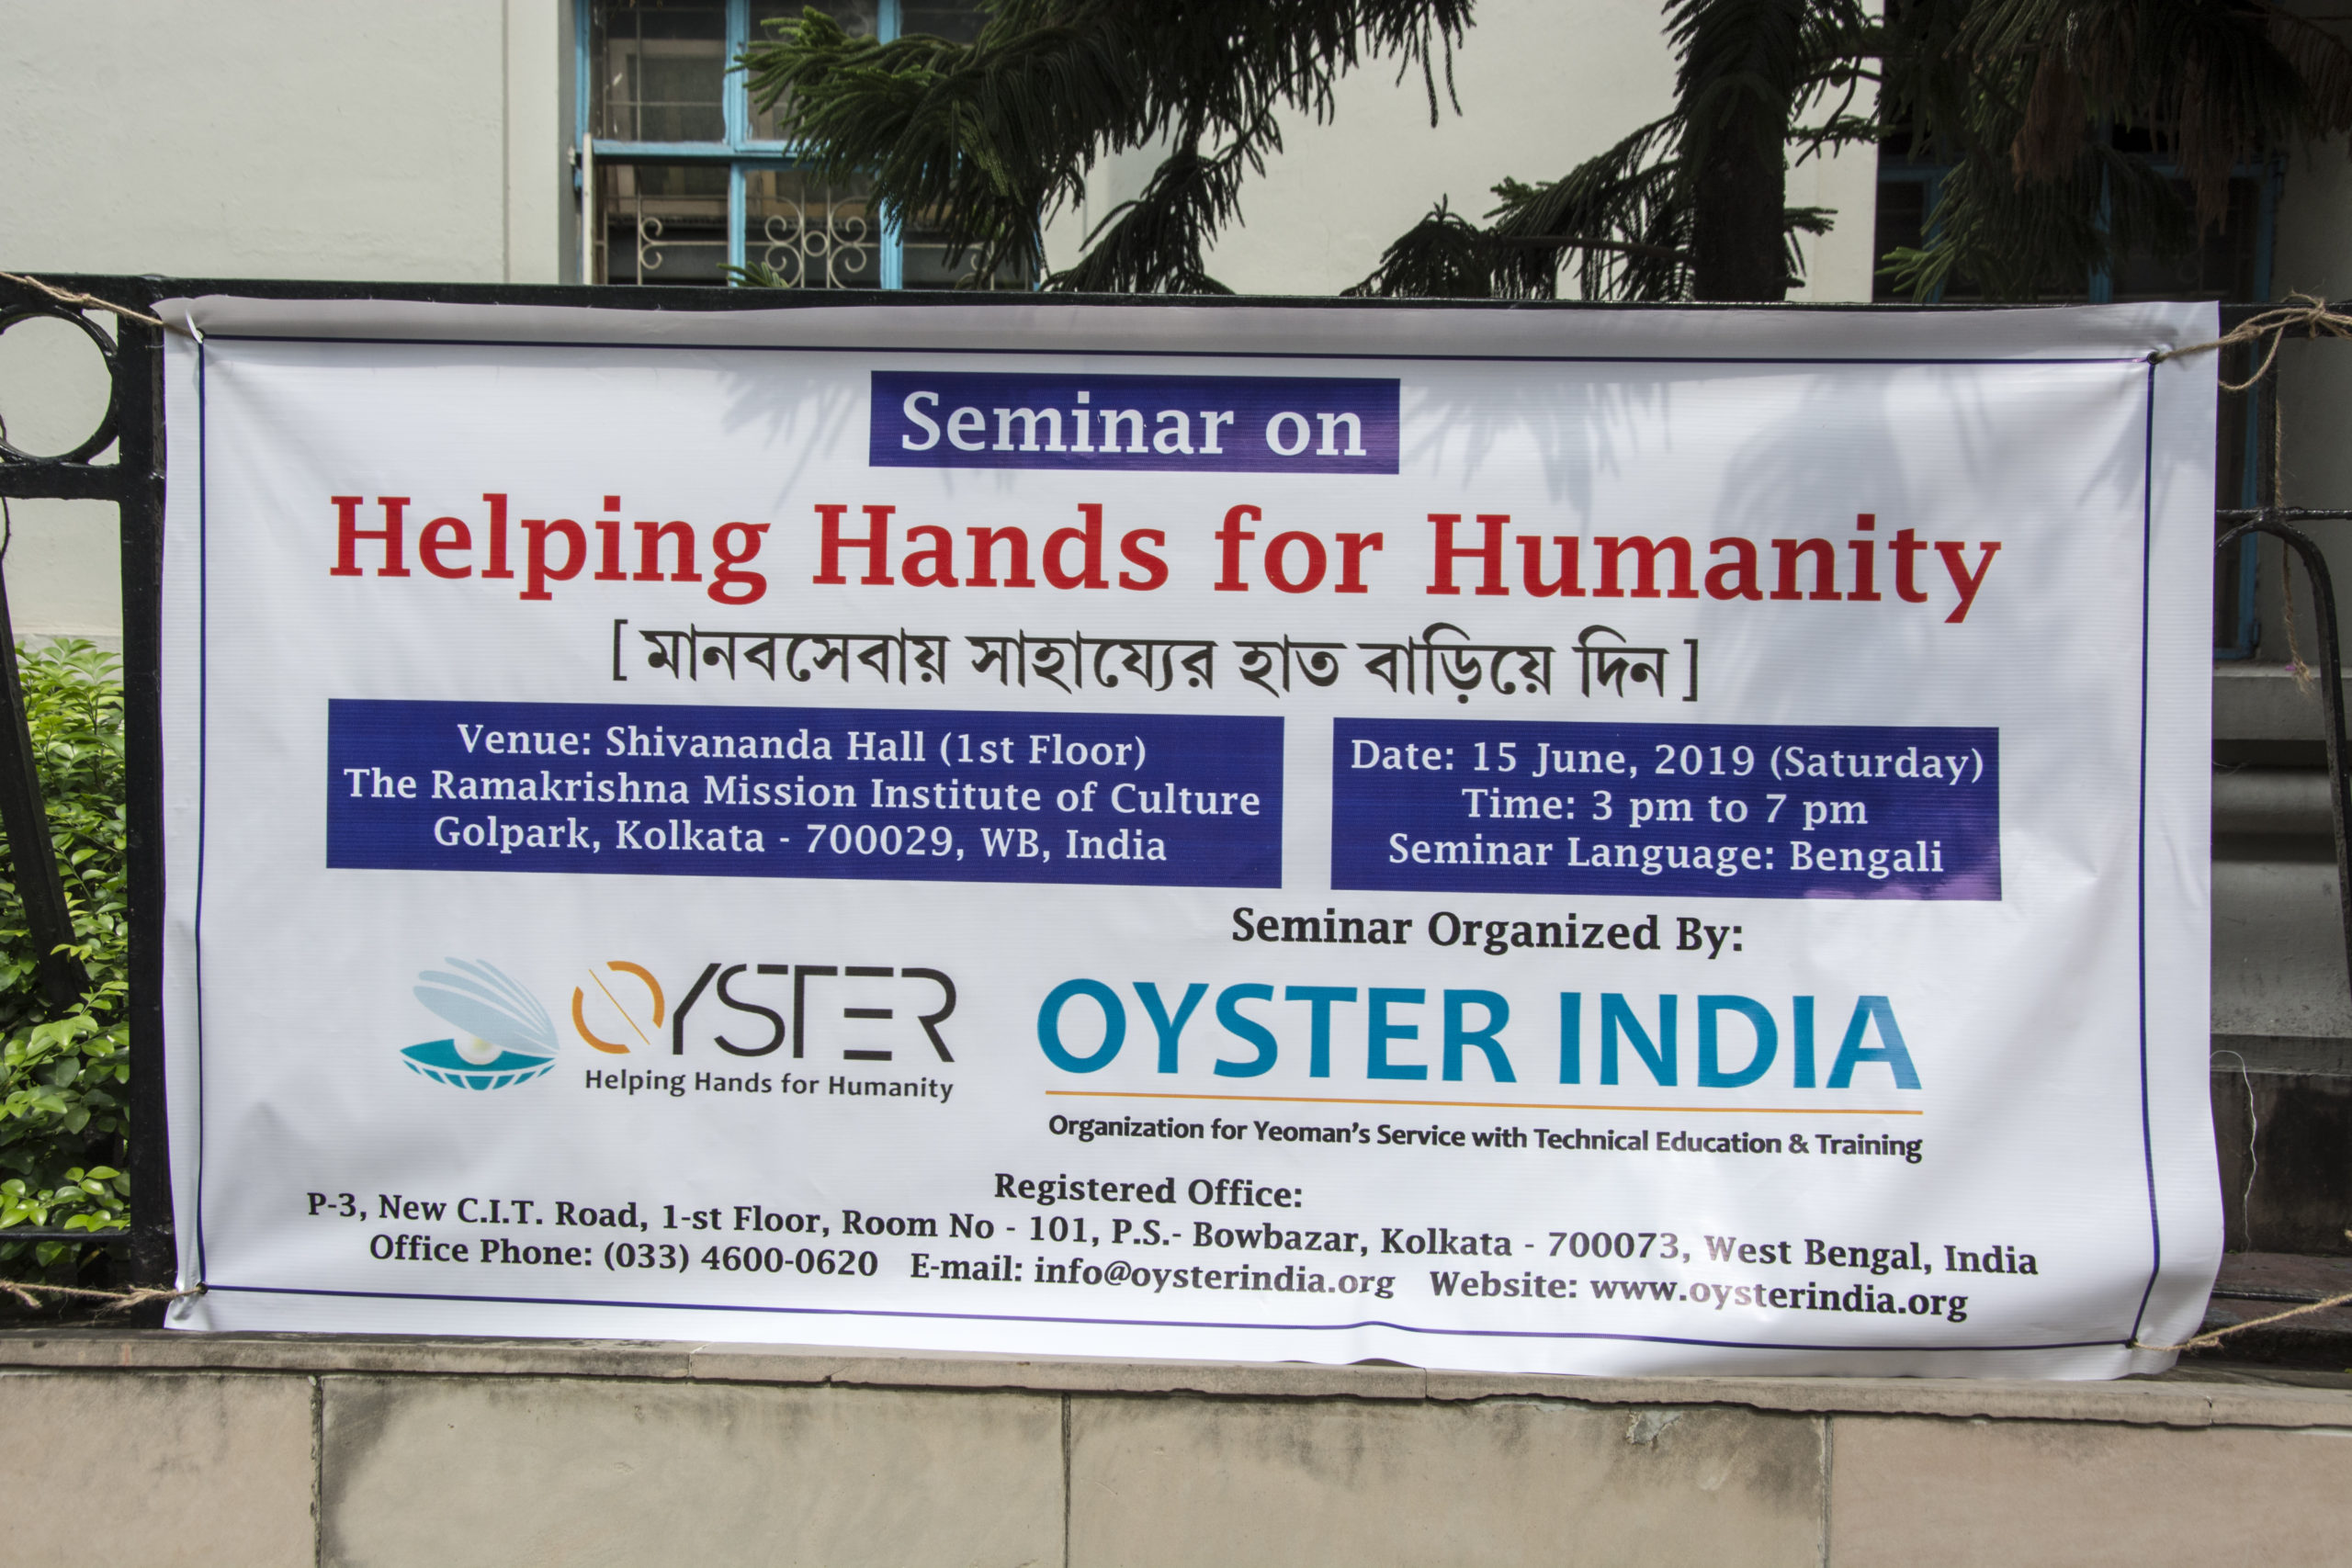 Images from Seminar on “Helping Hands for Humanity” Organized by Oyster India (Founder Secretary: Dr. Jakir Hossain Laskar)